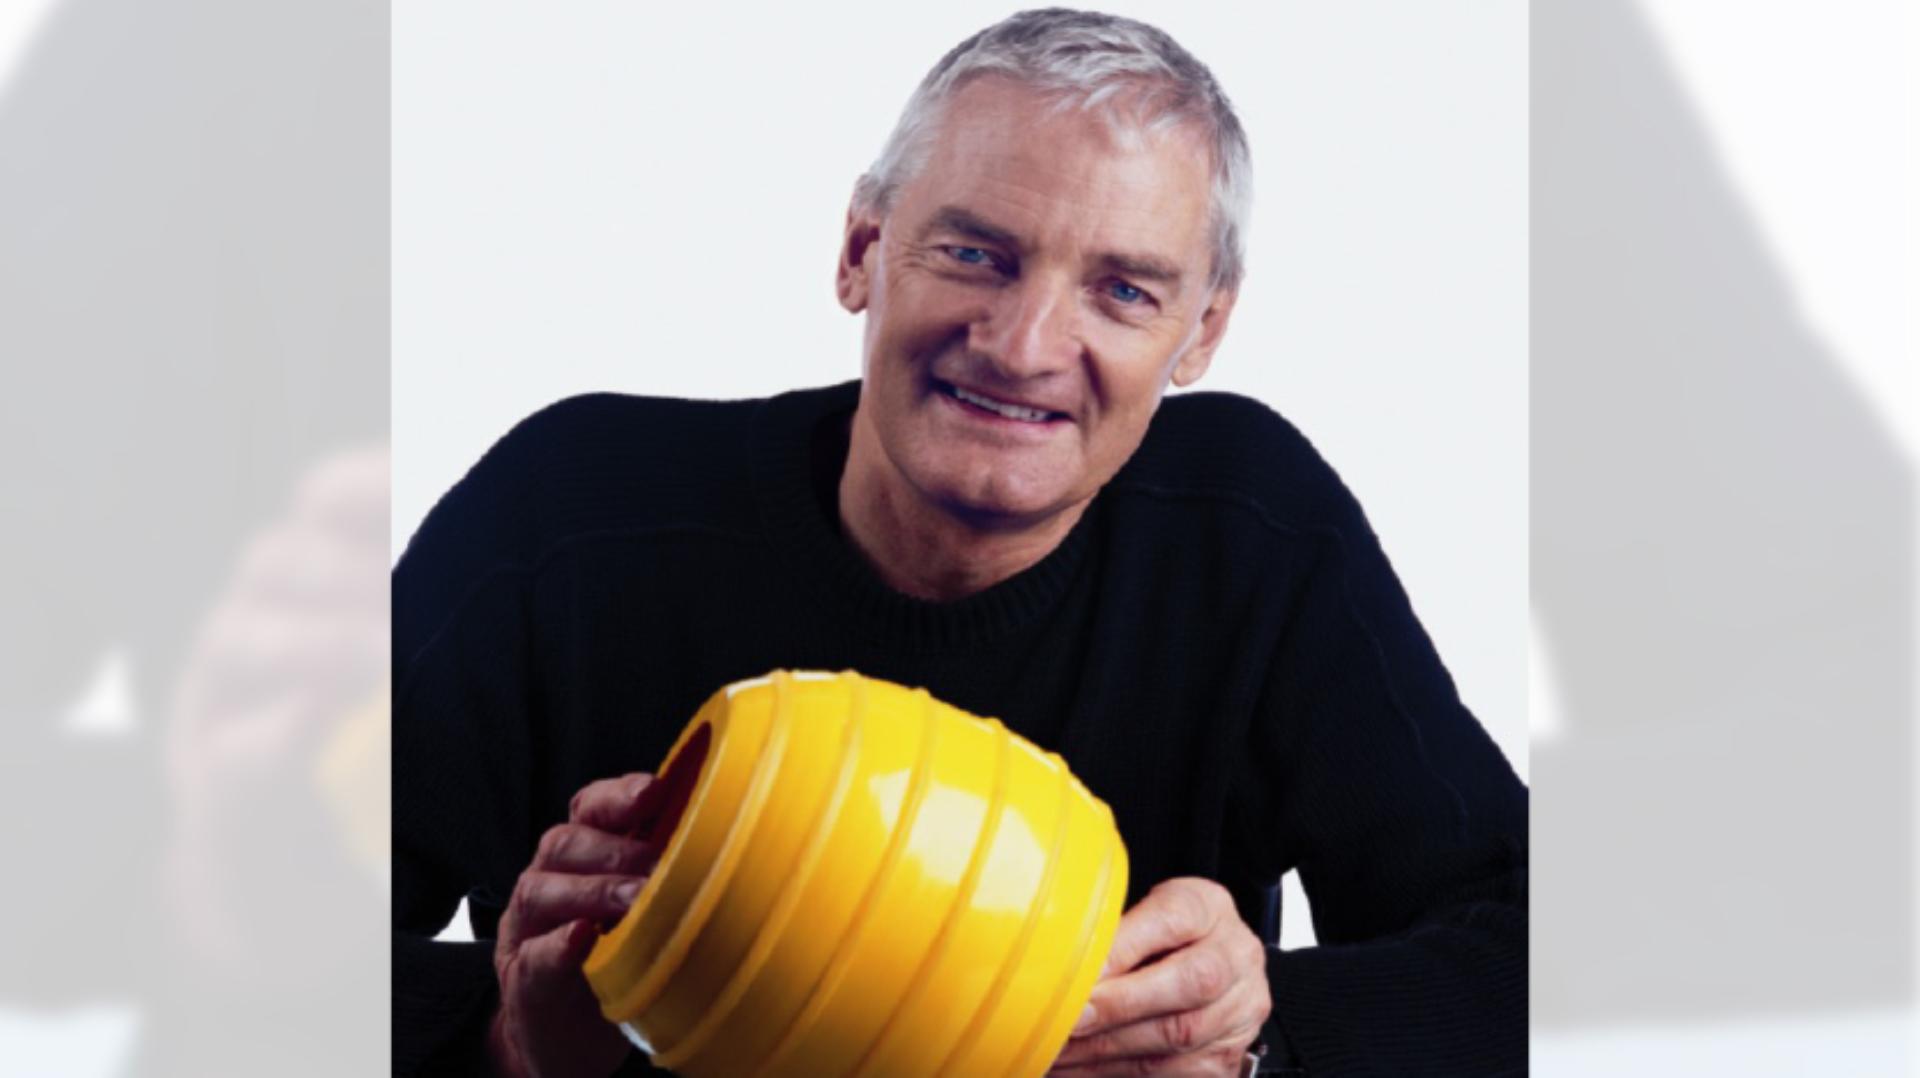 Close up James Dyson photo, with James holding a ball from the Ballbarrow design